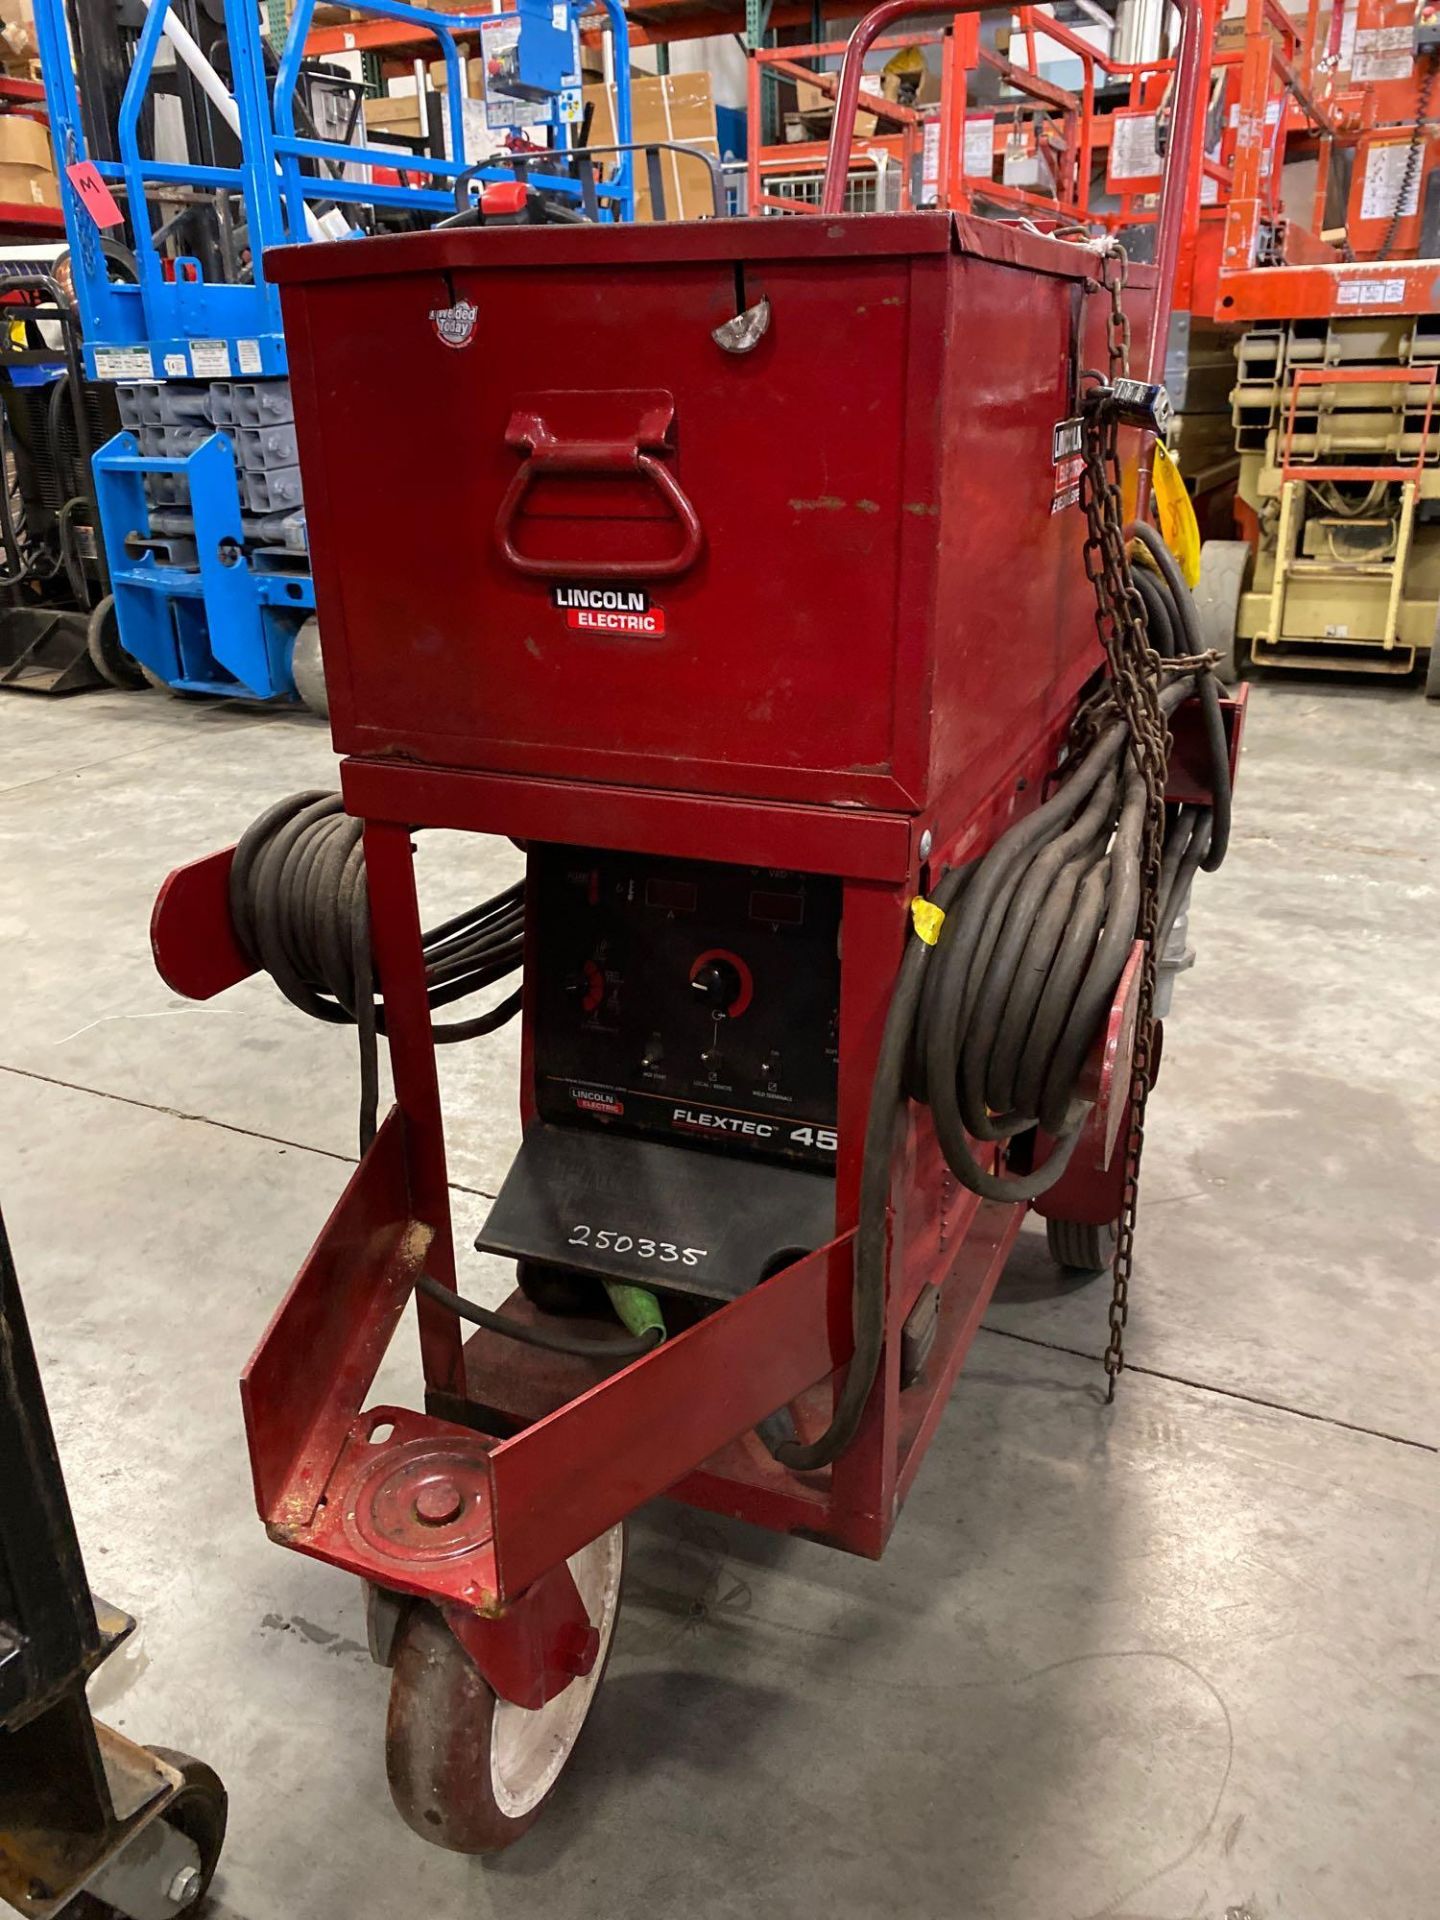 LINCOLN ELECTRIC FLEXTEC 450 WELDER WITH CART AND STORAGE BOX - Image 4 of 5